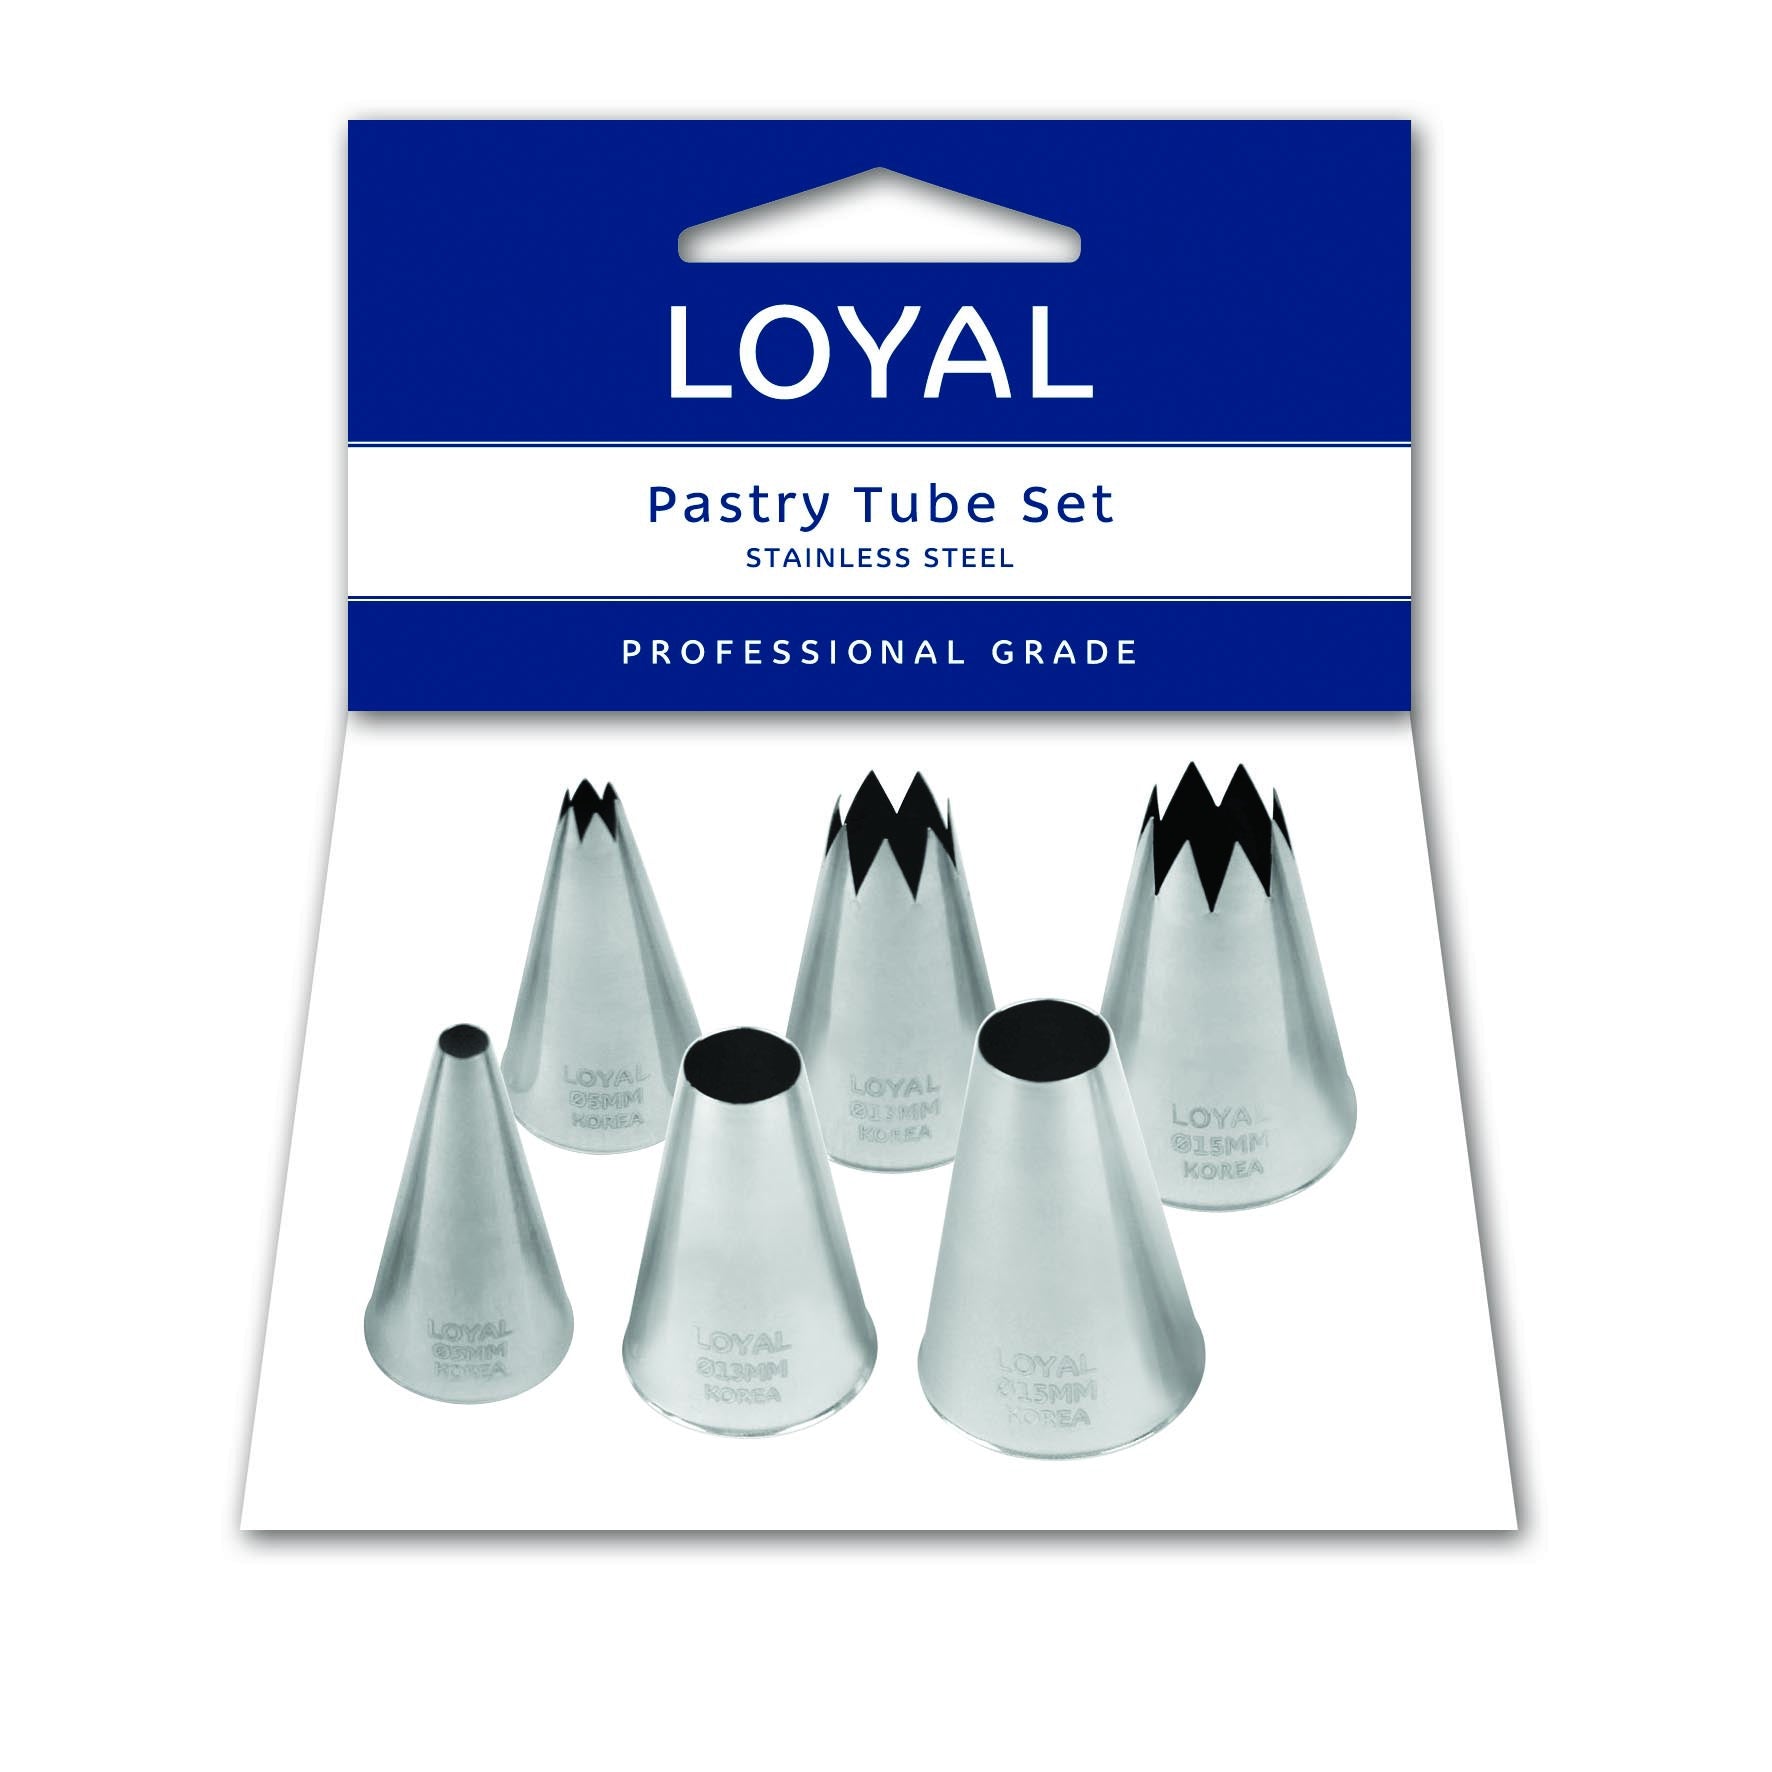 Loyal Set 6 Assorted Open Star+Round Pastry Tube S/S